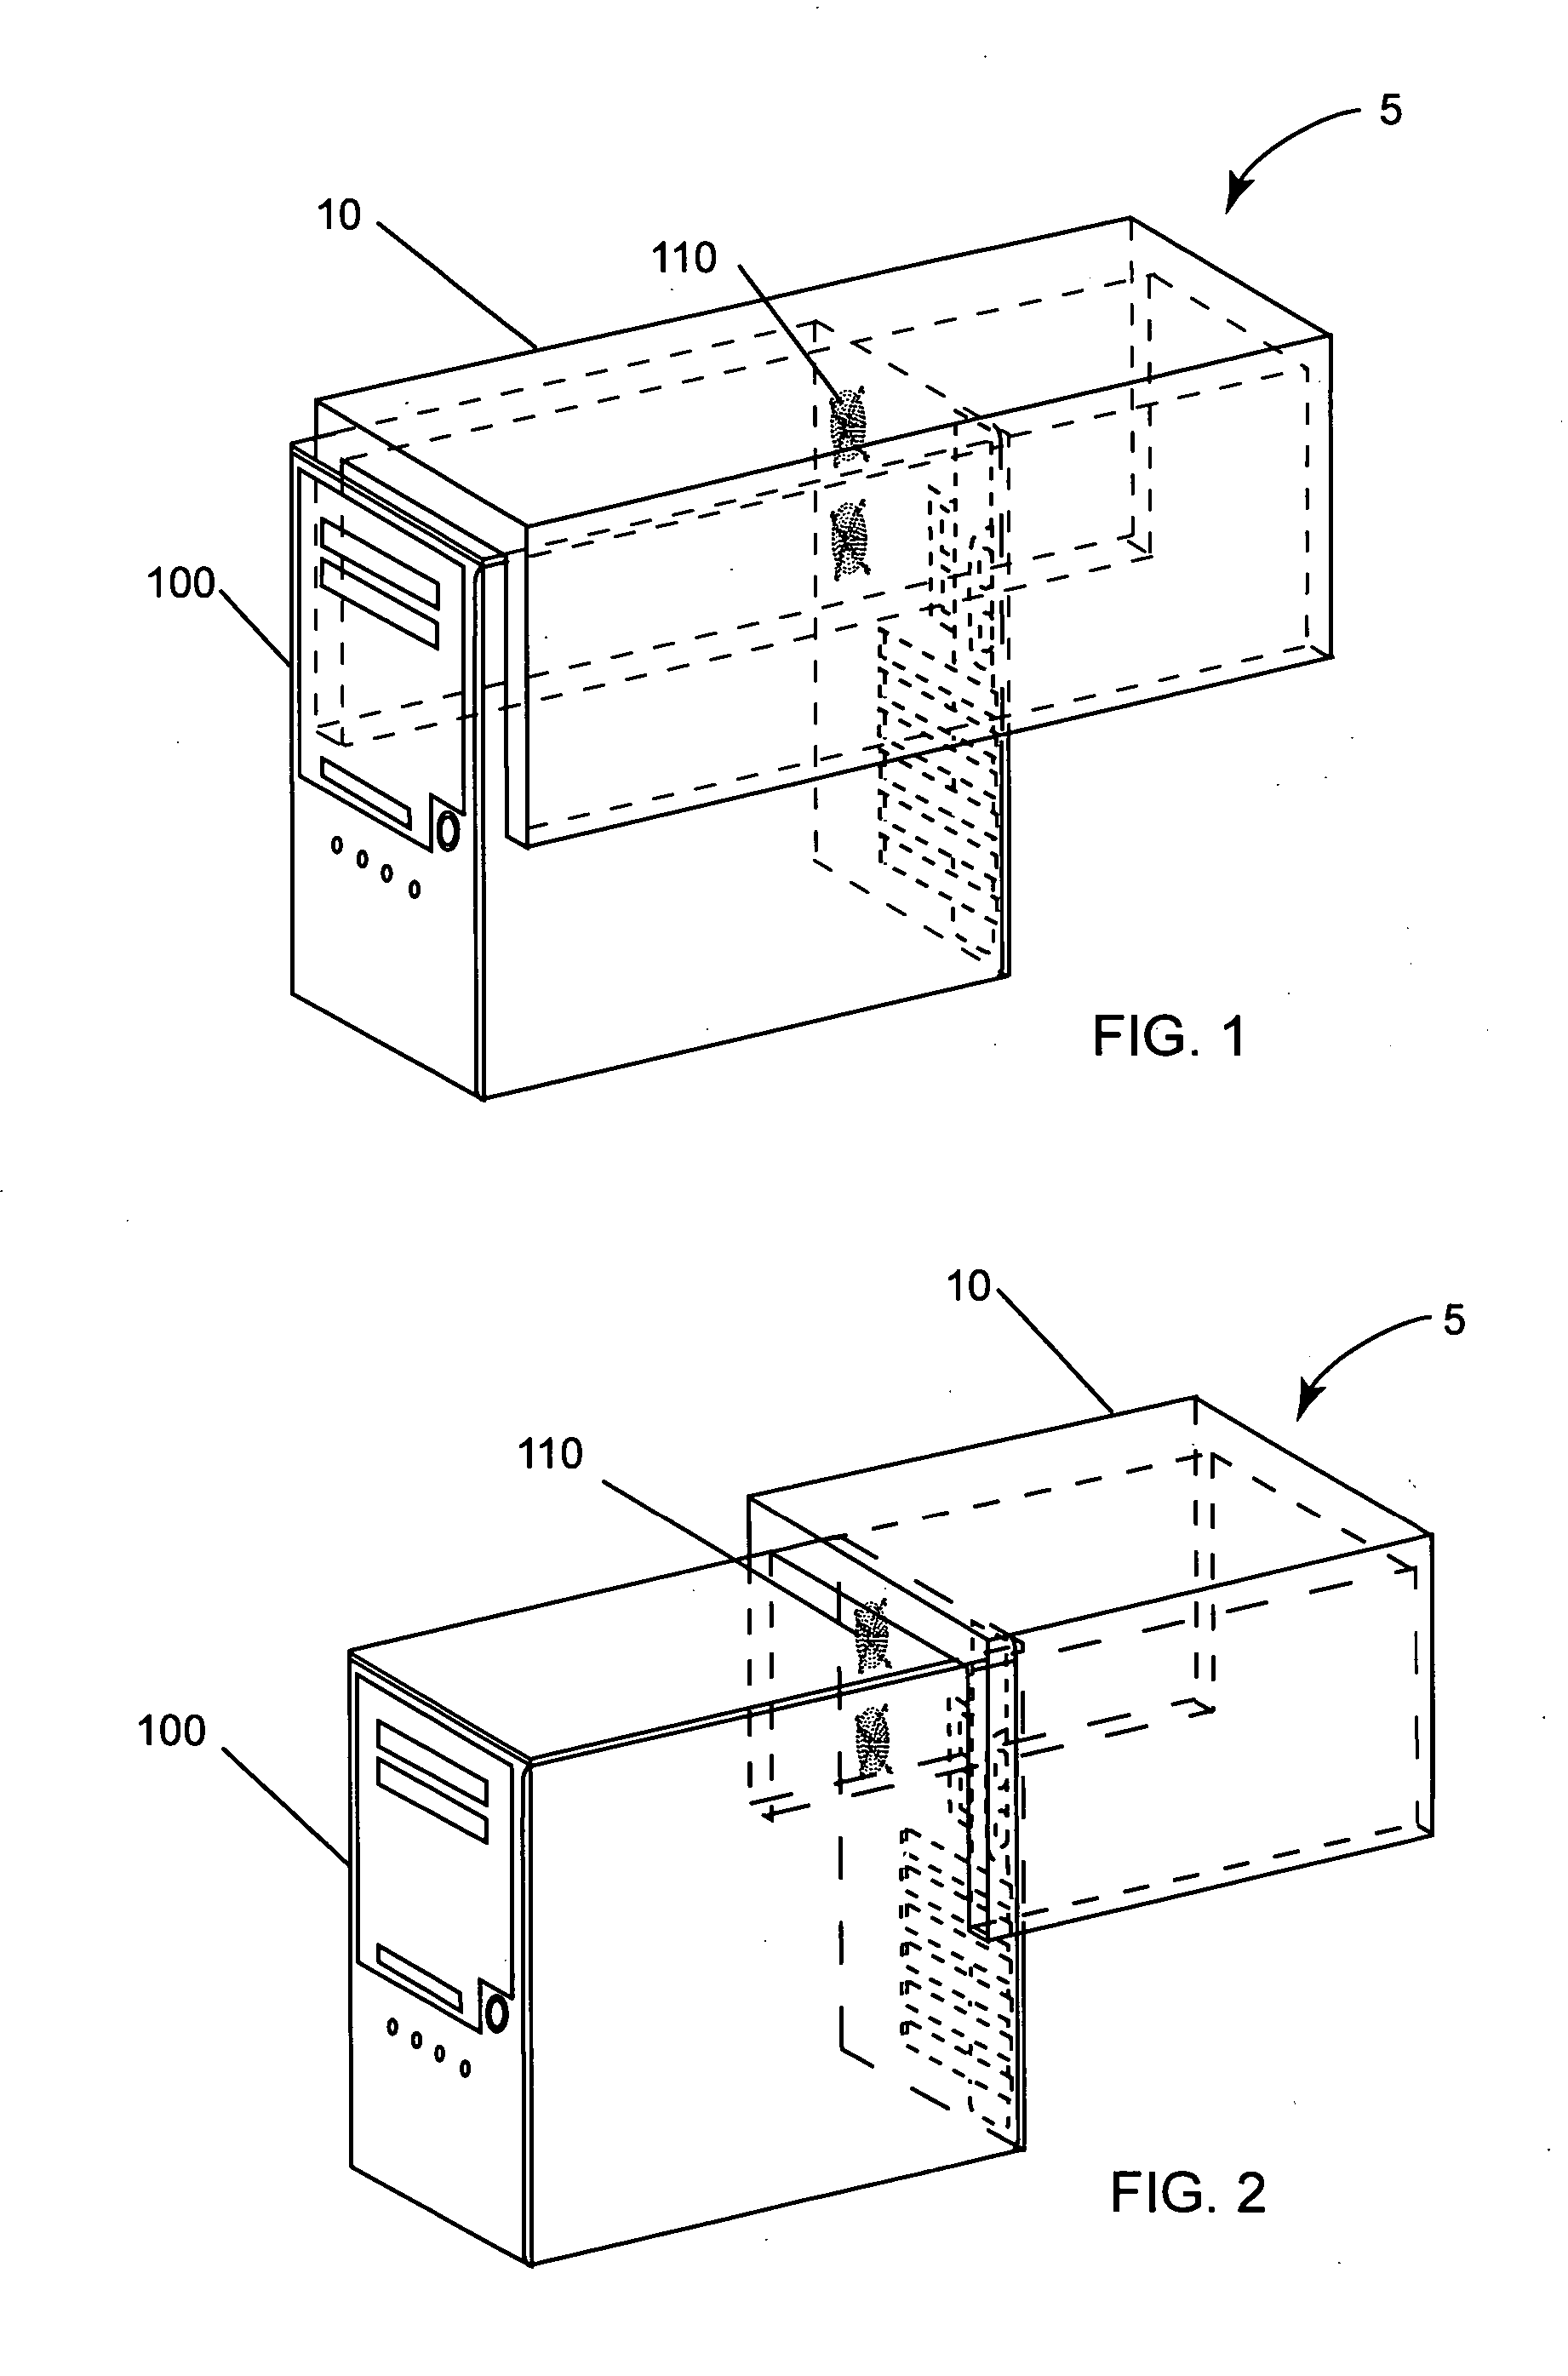 Acoustic noise reduction apparatus for personal computers and electronics